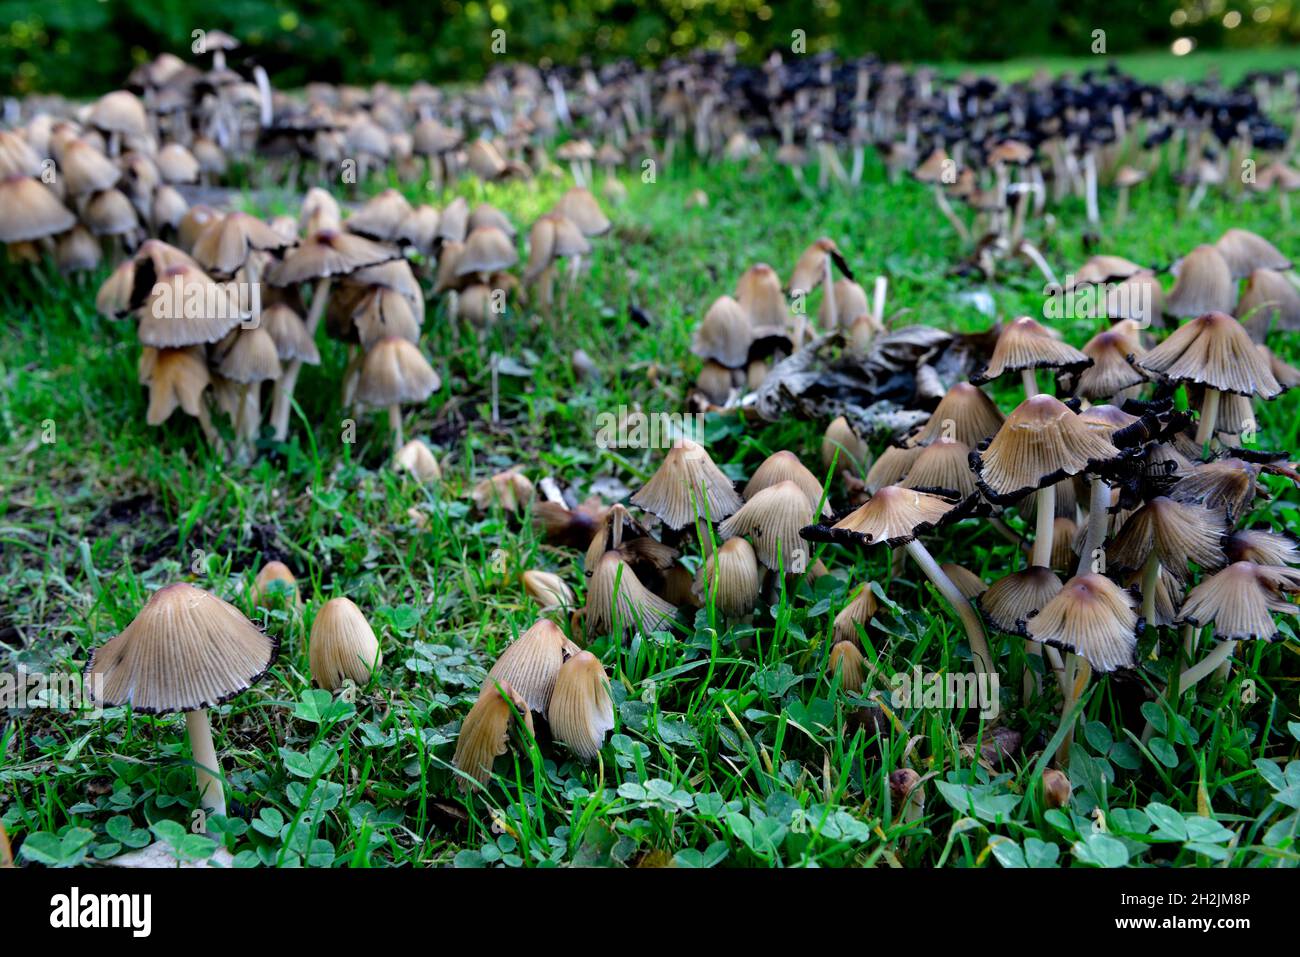 Clusters of common Inkcap mushrooms (Coprinopsis atramentaria) around a rotting hardwood tree stump, some young some autodigesting Stock Photo